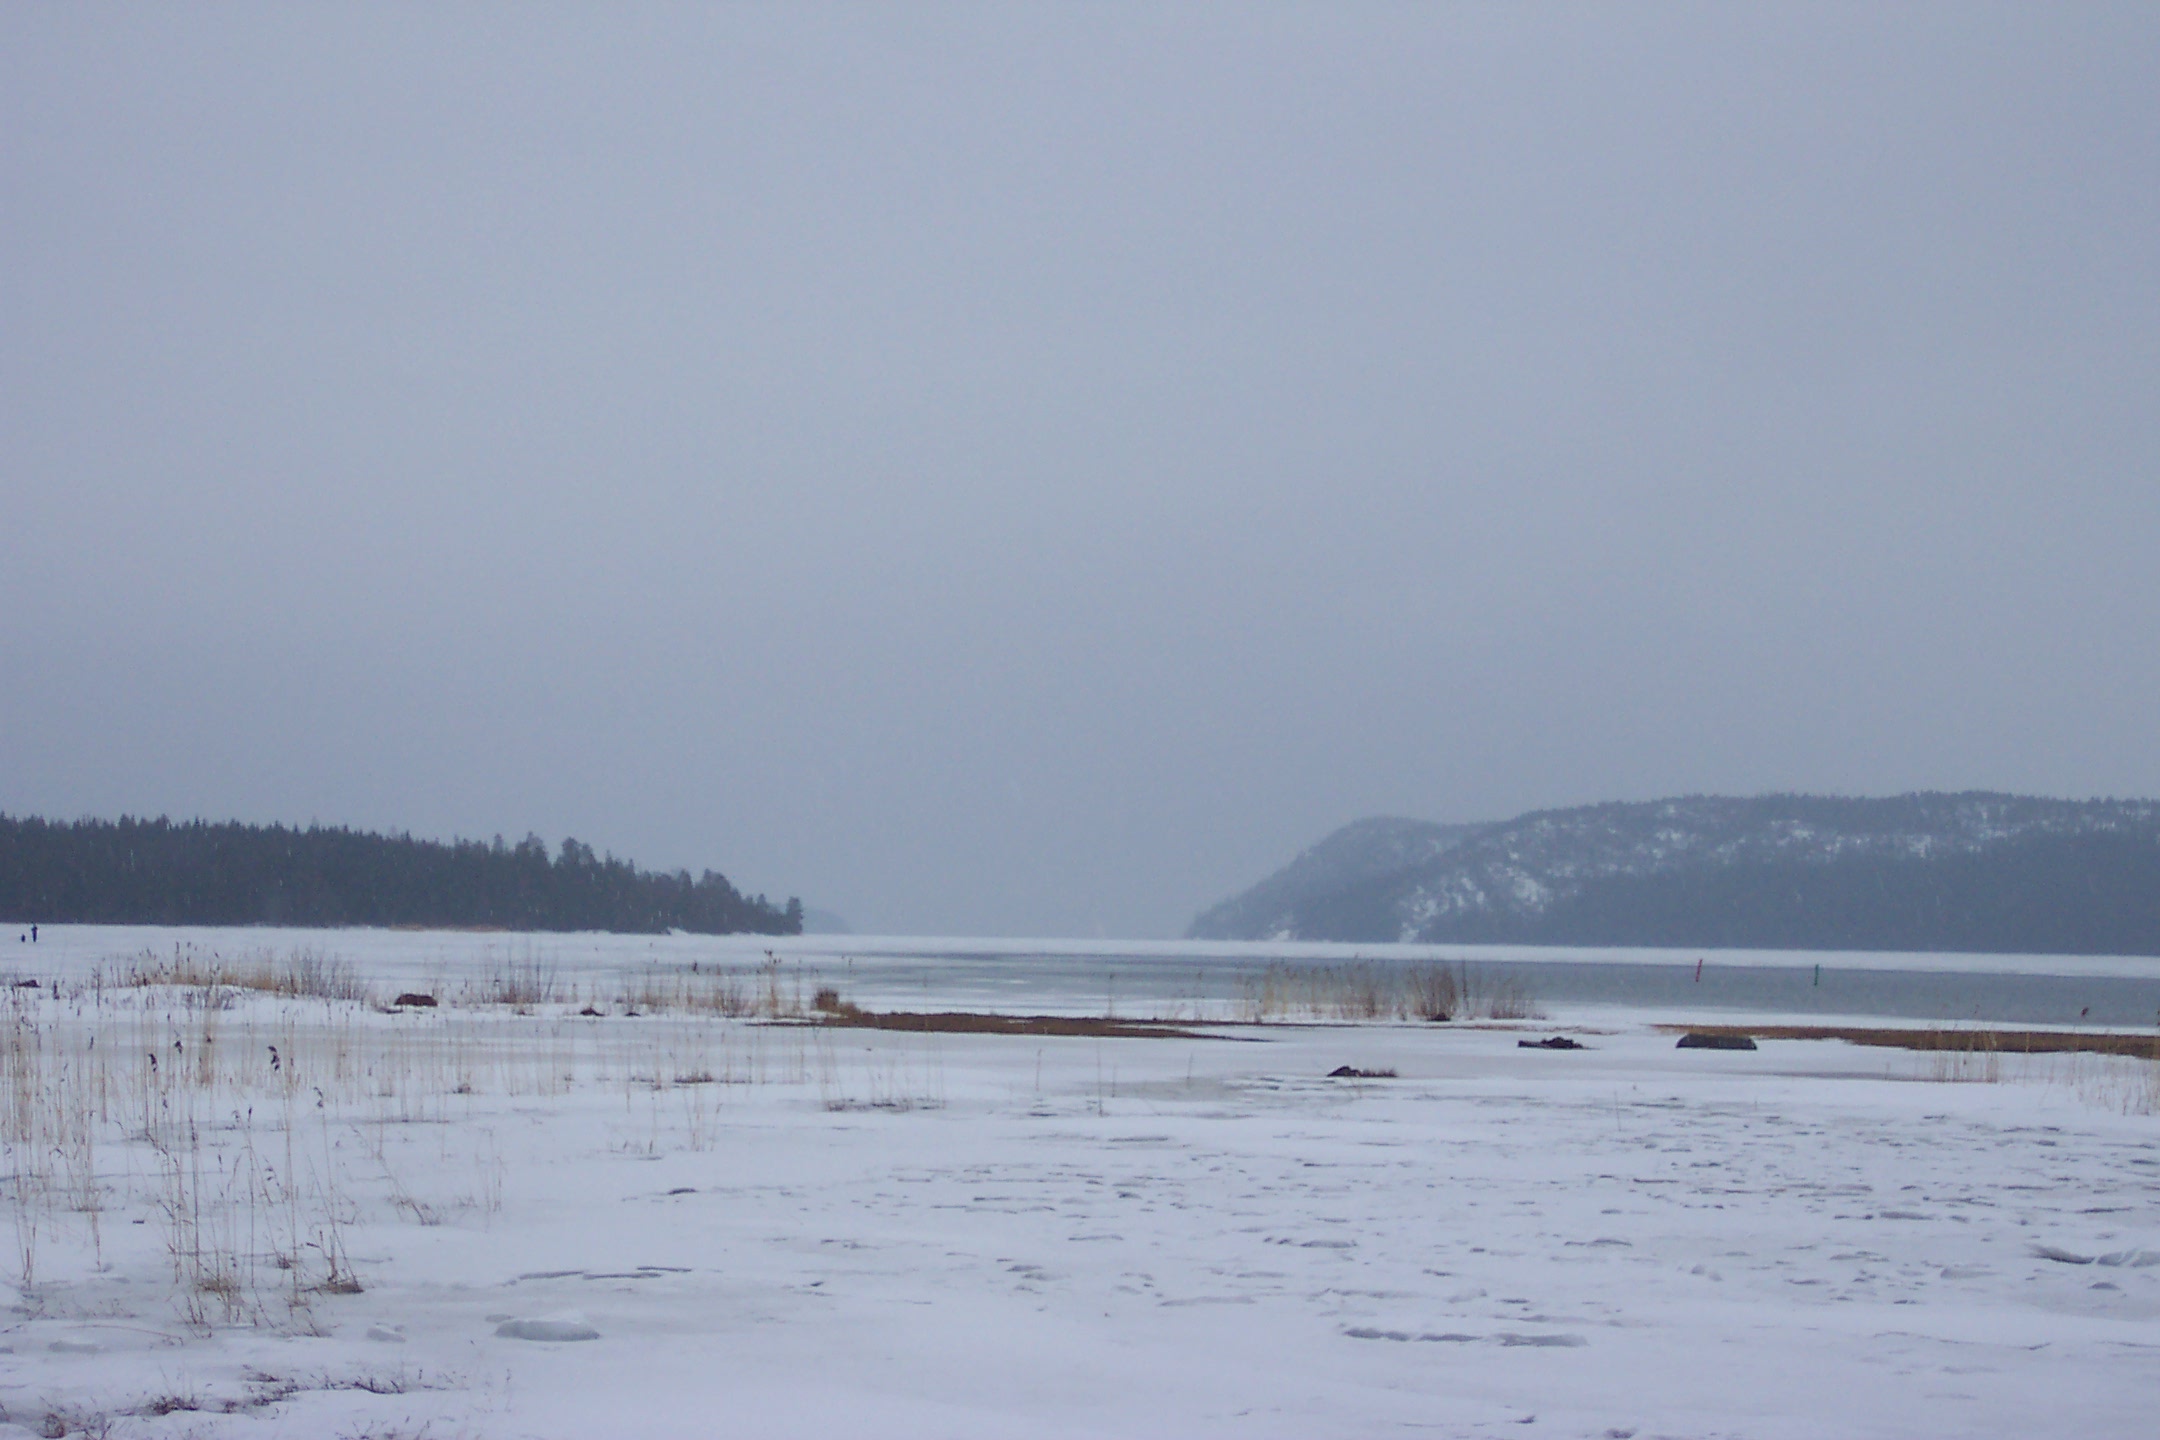 Bckfjrden (Creek Bay) in Winter. This is where my dads (Stig) summer cabin is located